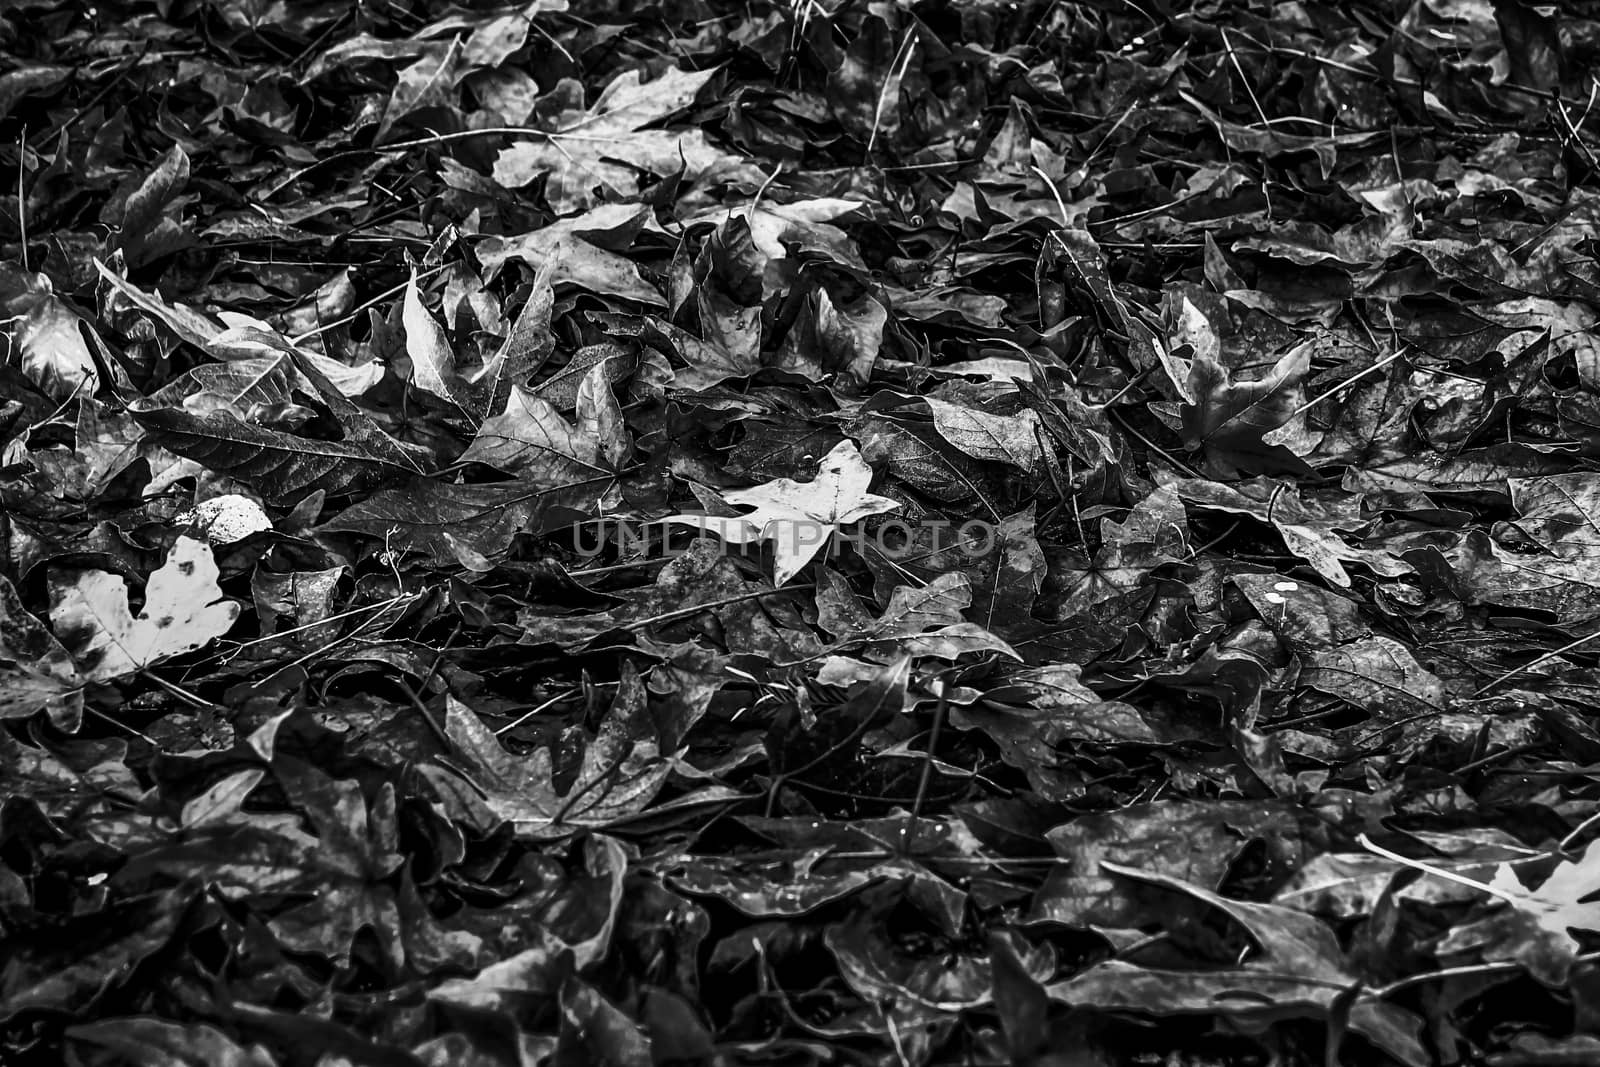 maple leaves on the ground in autumn season in black and white